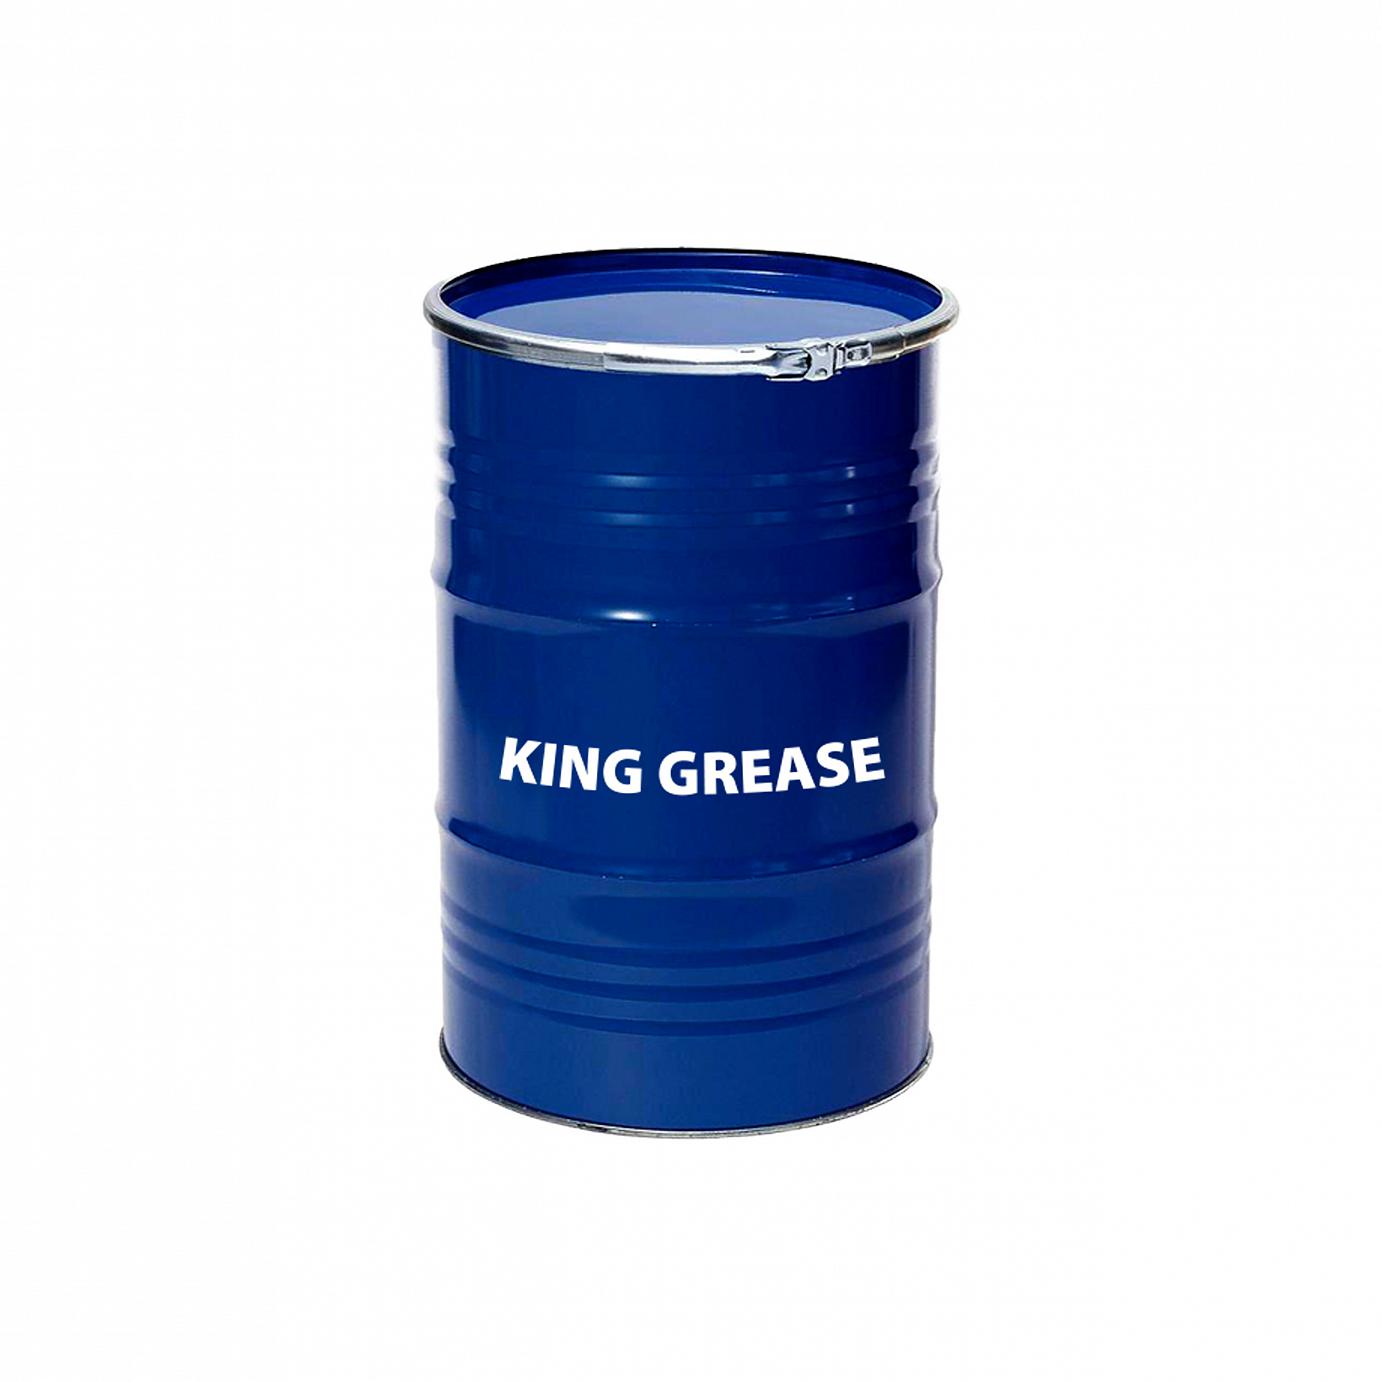 King grease MP3 Lithium (Phuy 180kg)